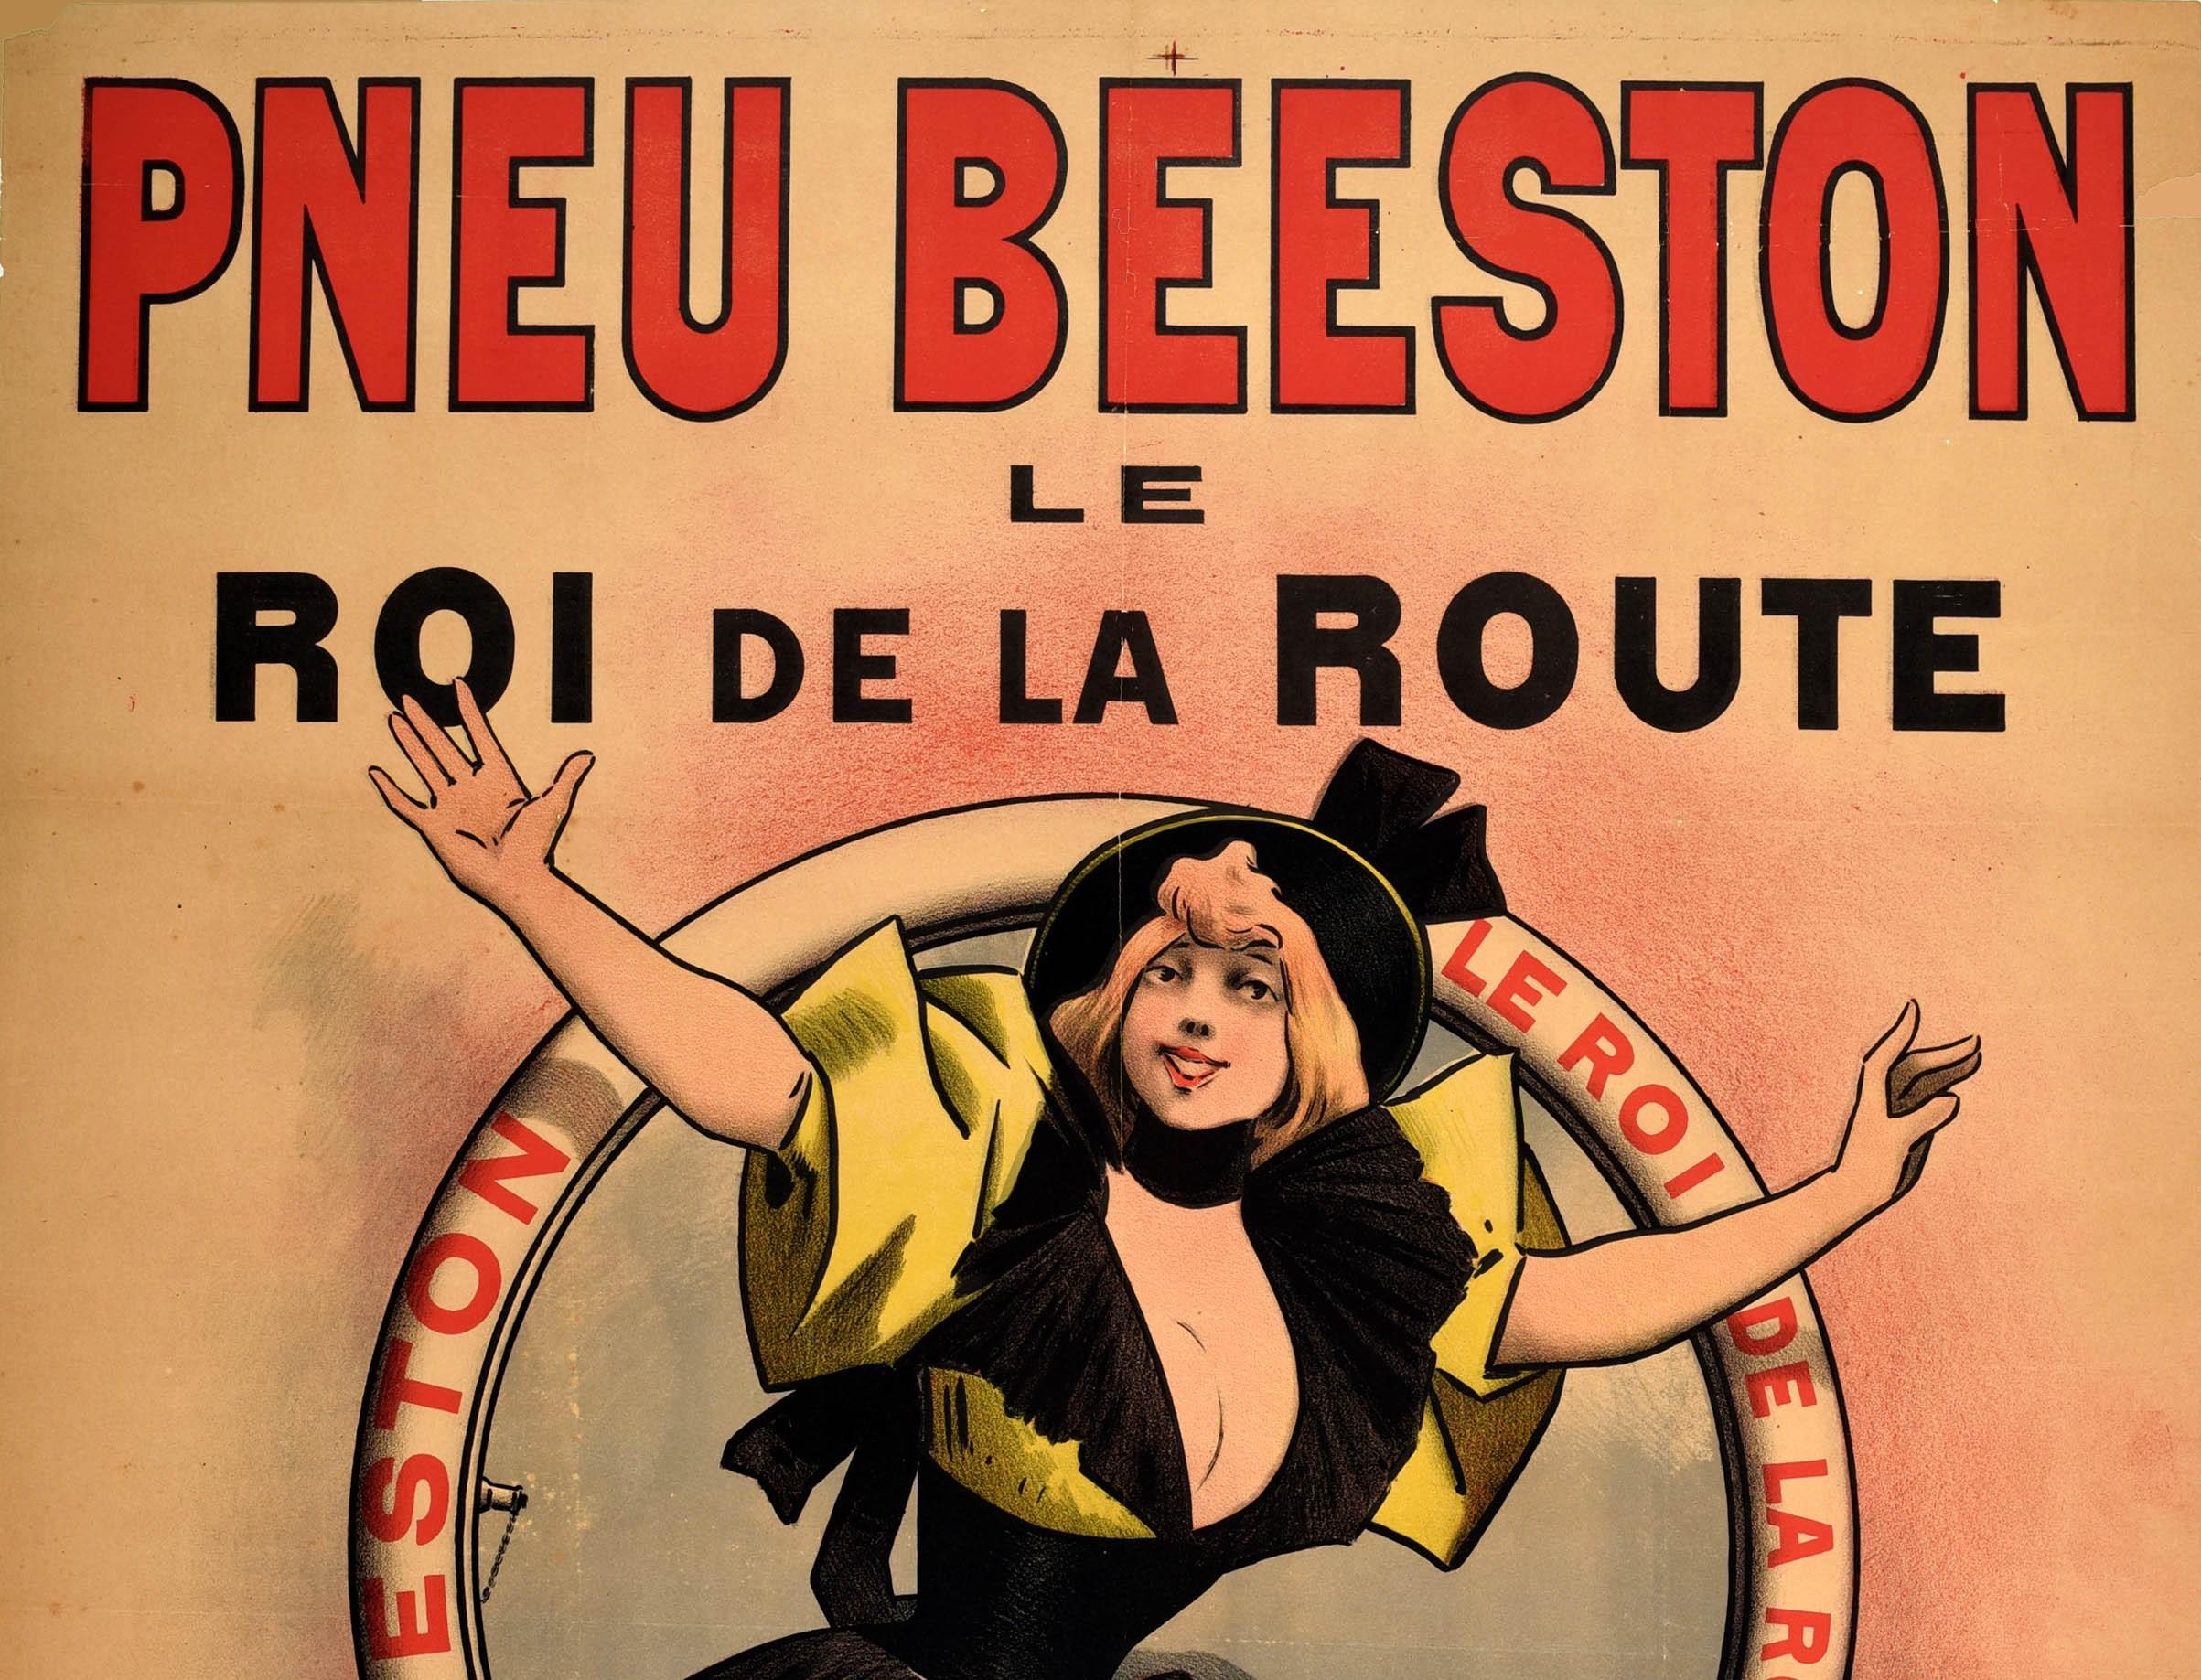 Original antique advertising poster for Beeston tyres The King of the Road / Pneu Beeston le Roi de la Route featuring artwork by Alfred Choubrac (1853-1902) showing a lady in fashionable clothing sitting in a tire with the bold text above and below